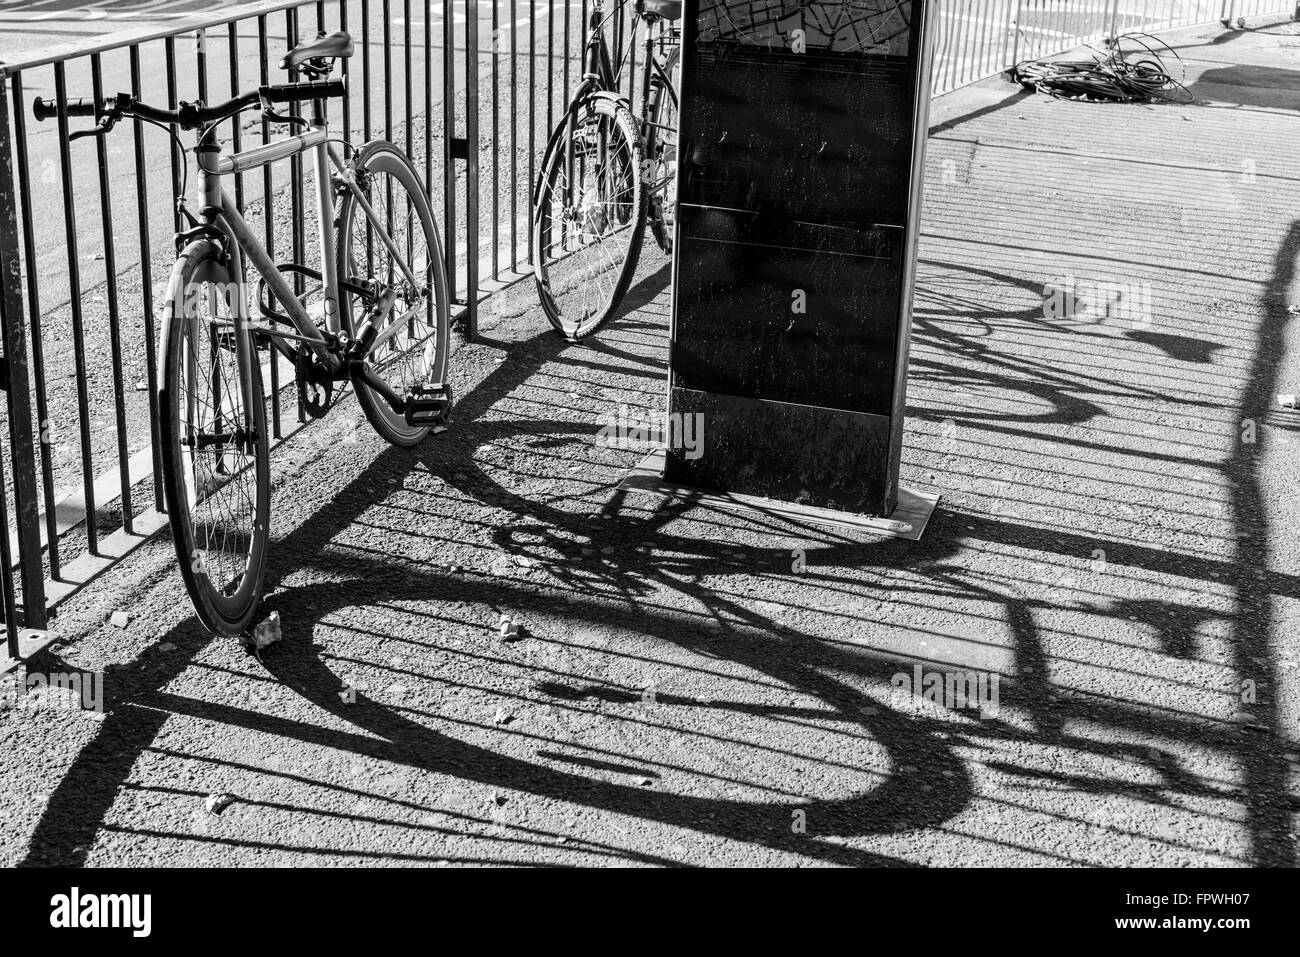 Two road city bikes locked to a metal fence. next to a road. Big shadows projected on the pavement.Black and white. Stock Photo